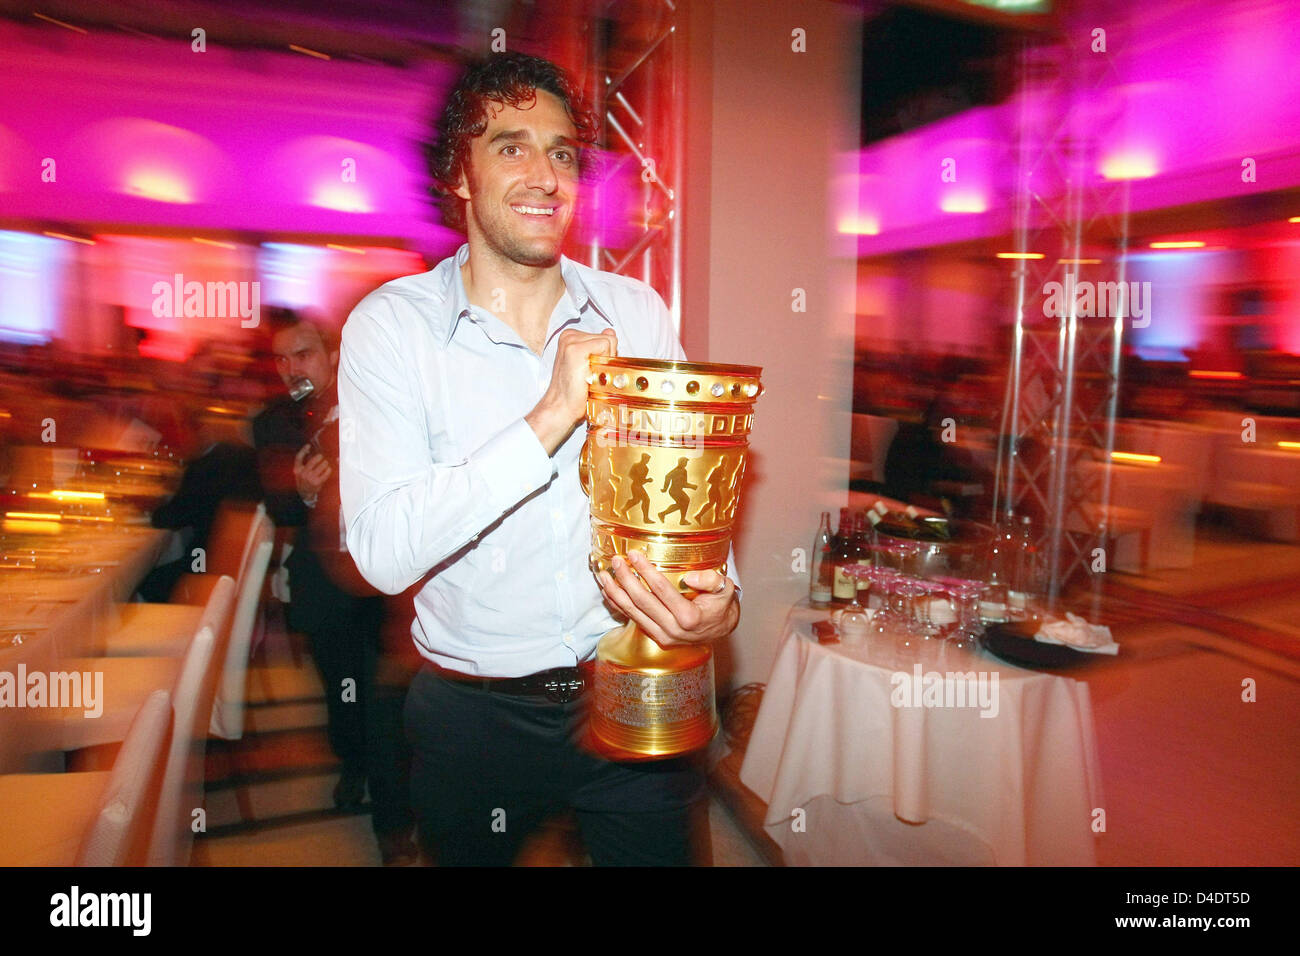 Luca Toni of Bayern Munic poses with the DFB-Trophy during the Bayern Munich champions party after the DFB Cup Final match between Borussia Dortmund and FC Bayern Munich at the Deutsche Telekom Represantive House Berlin, Germany, in the early morning hours of 20 April 2008. Photo: Alexander Hassenstein Stock Photo